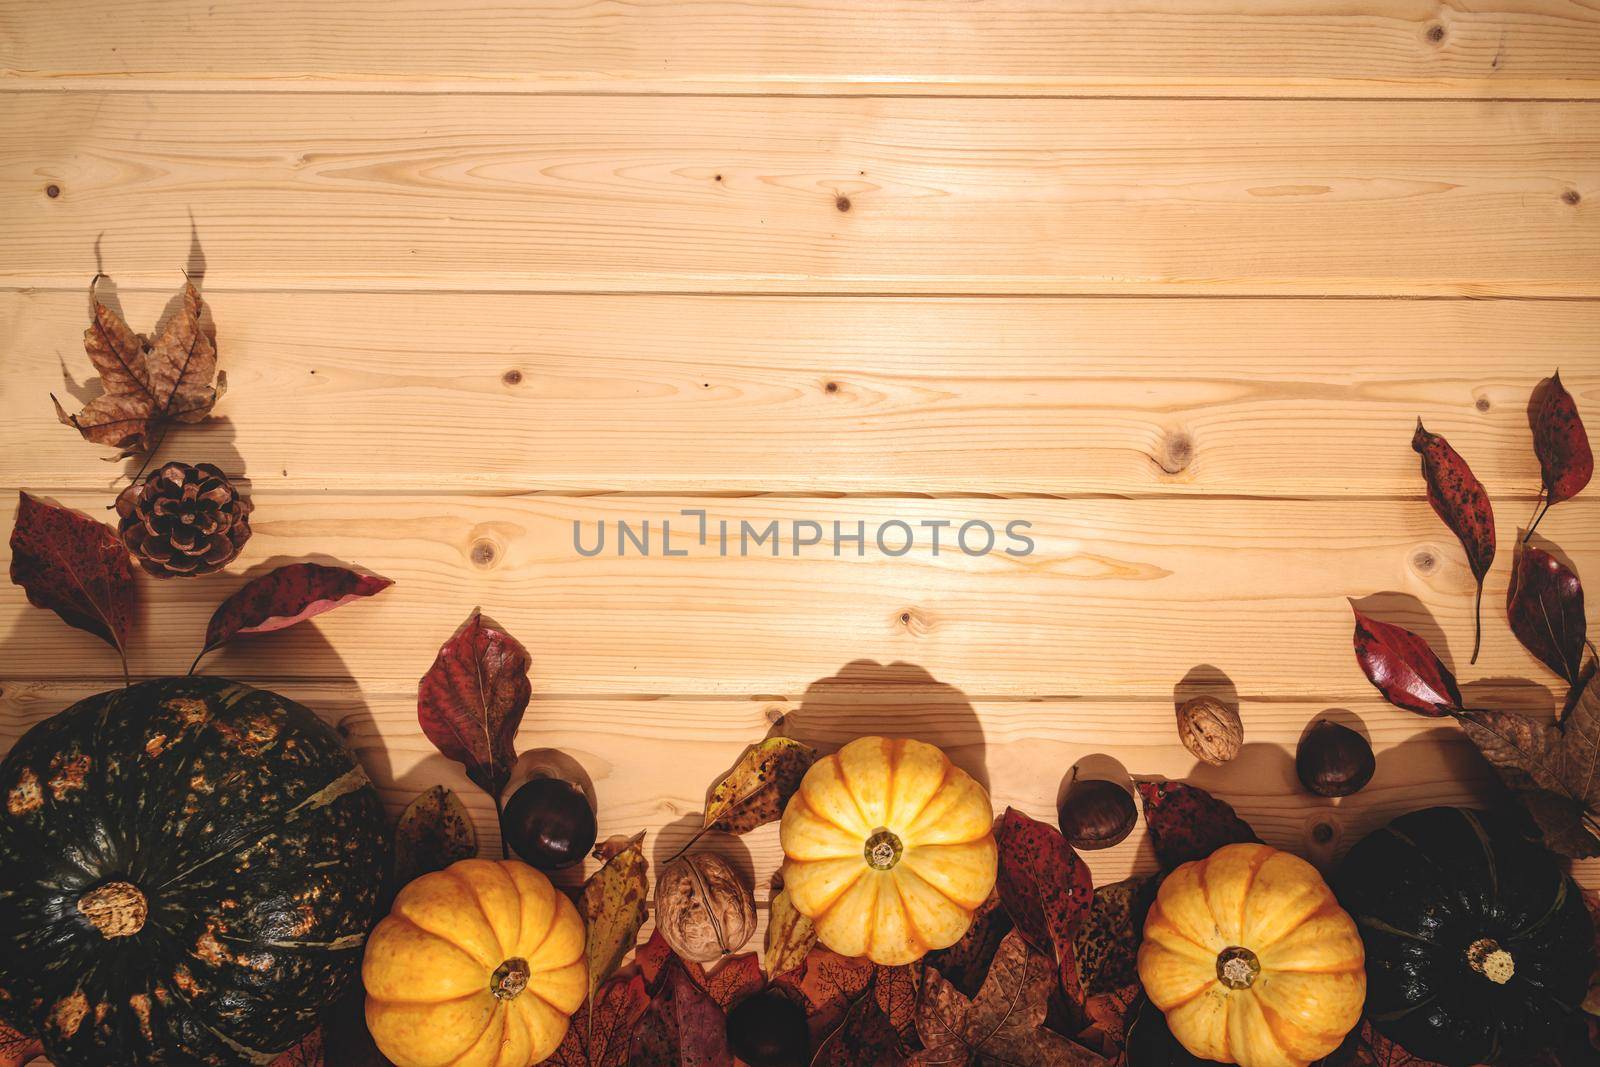 Happy Thanksgiving Day with pumpkin and nut on wooden background